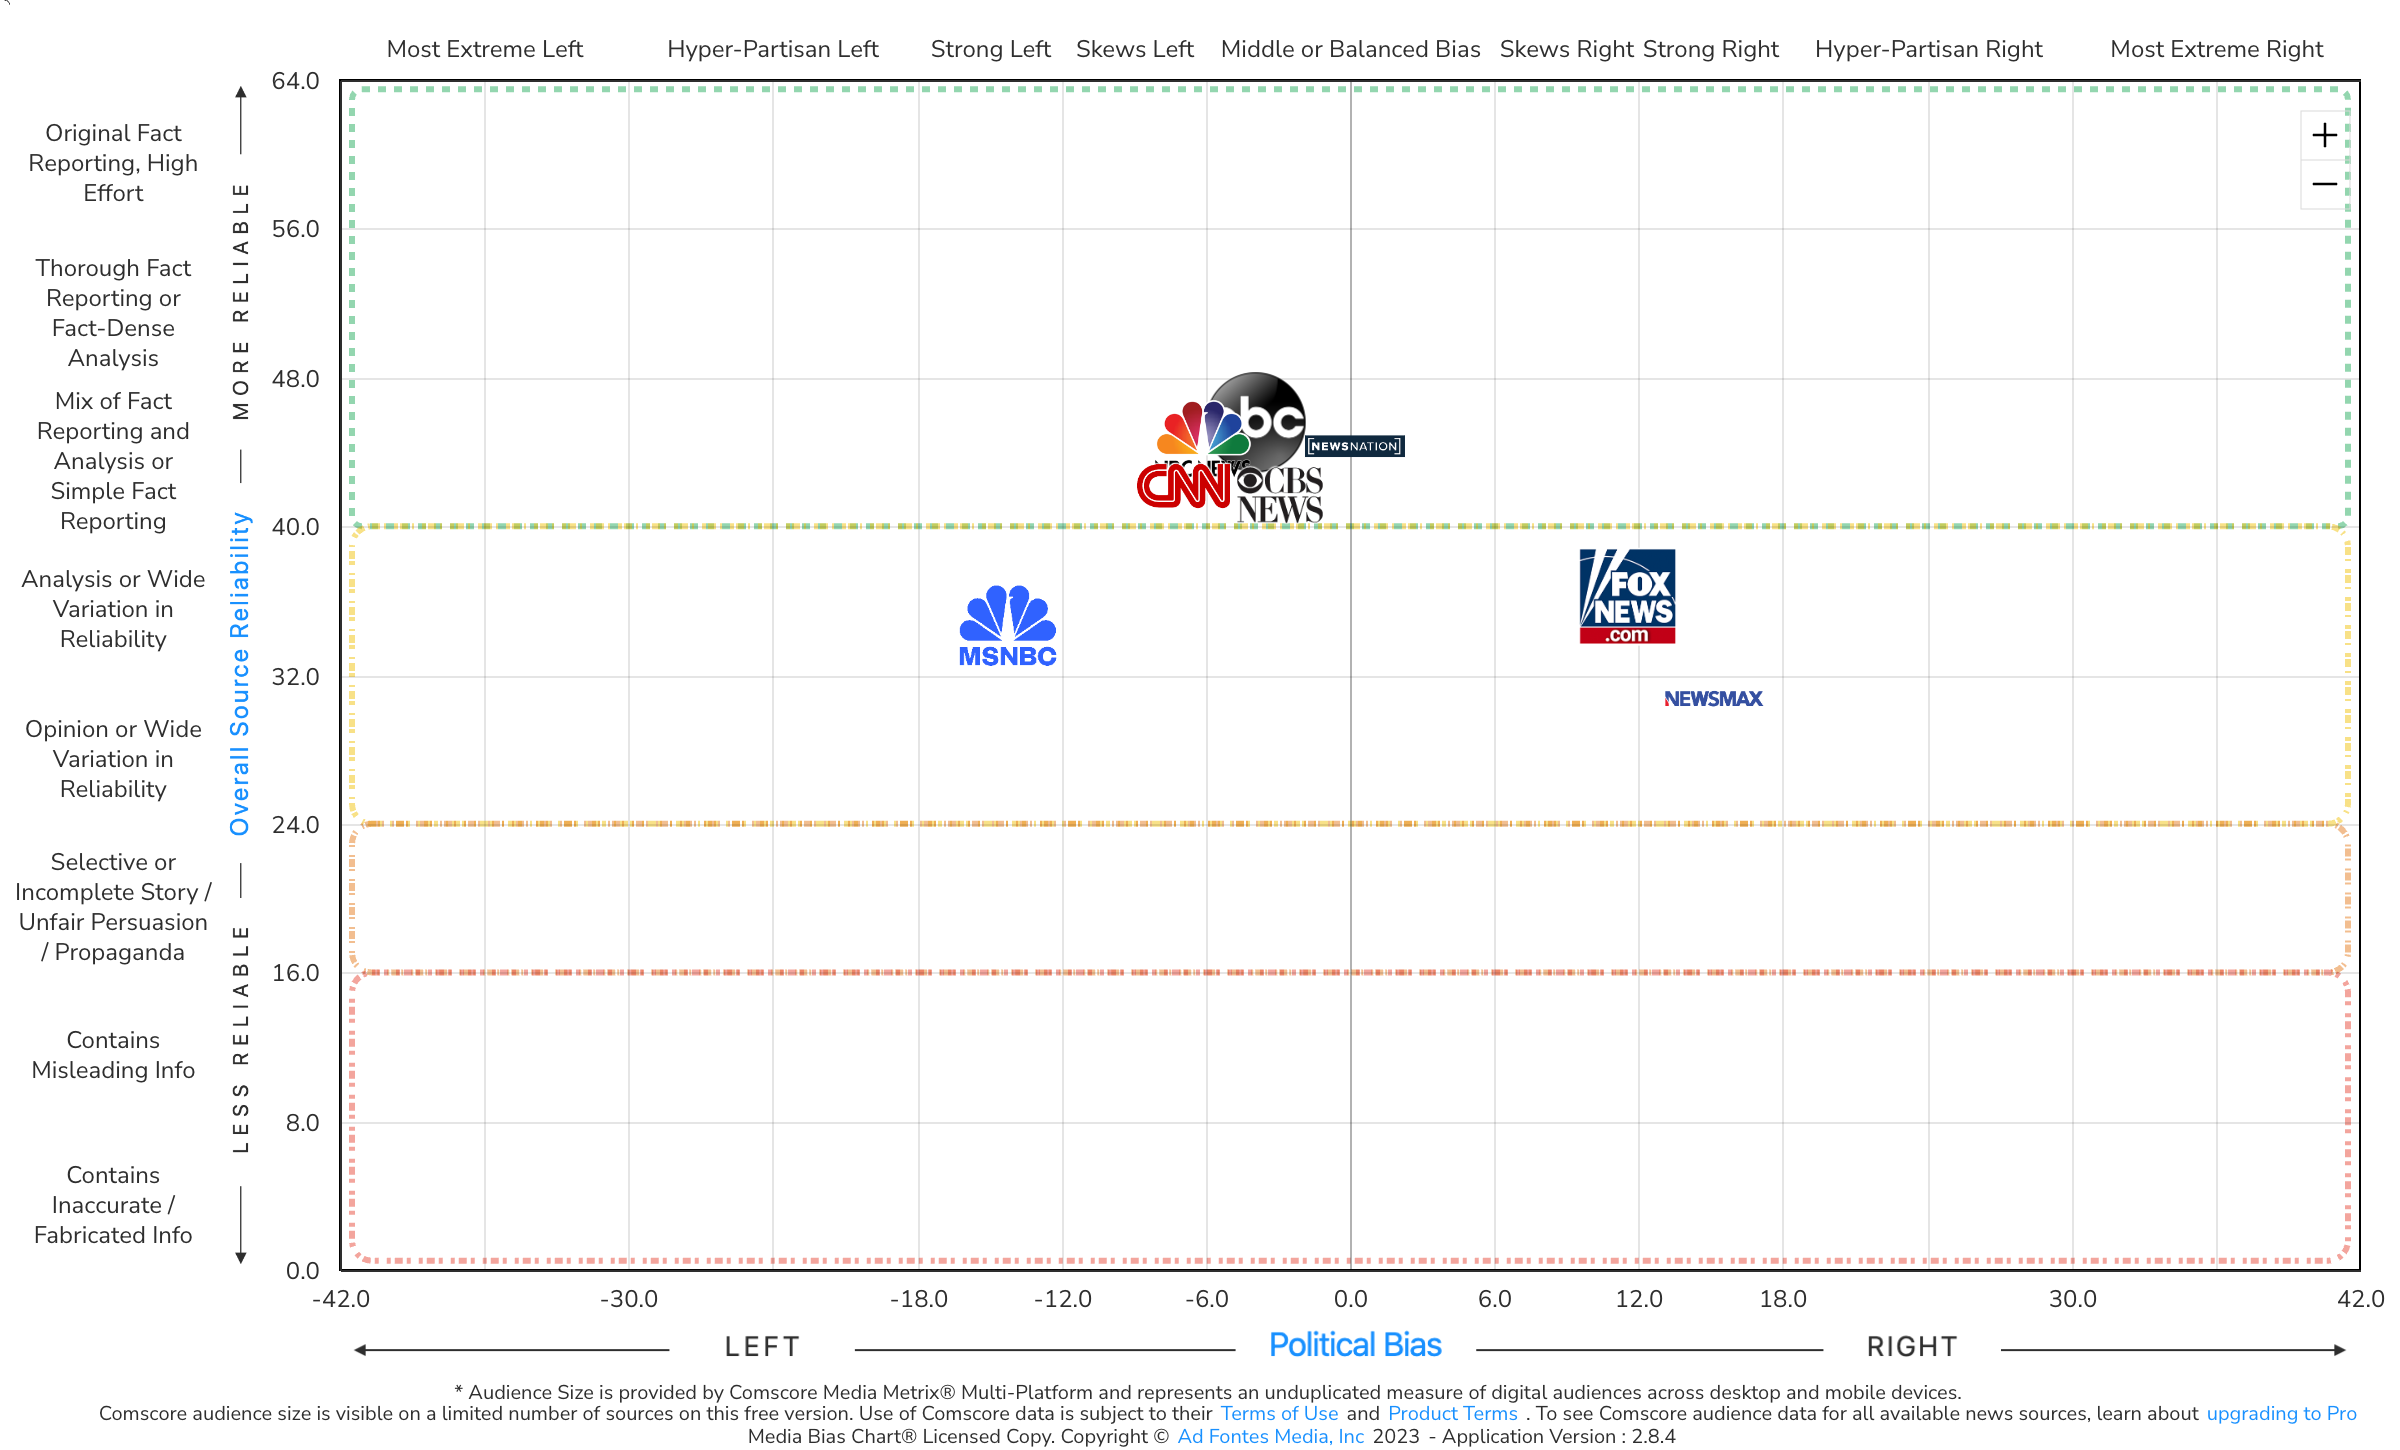 Cable News Outlets Bias and Reliability